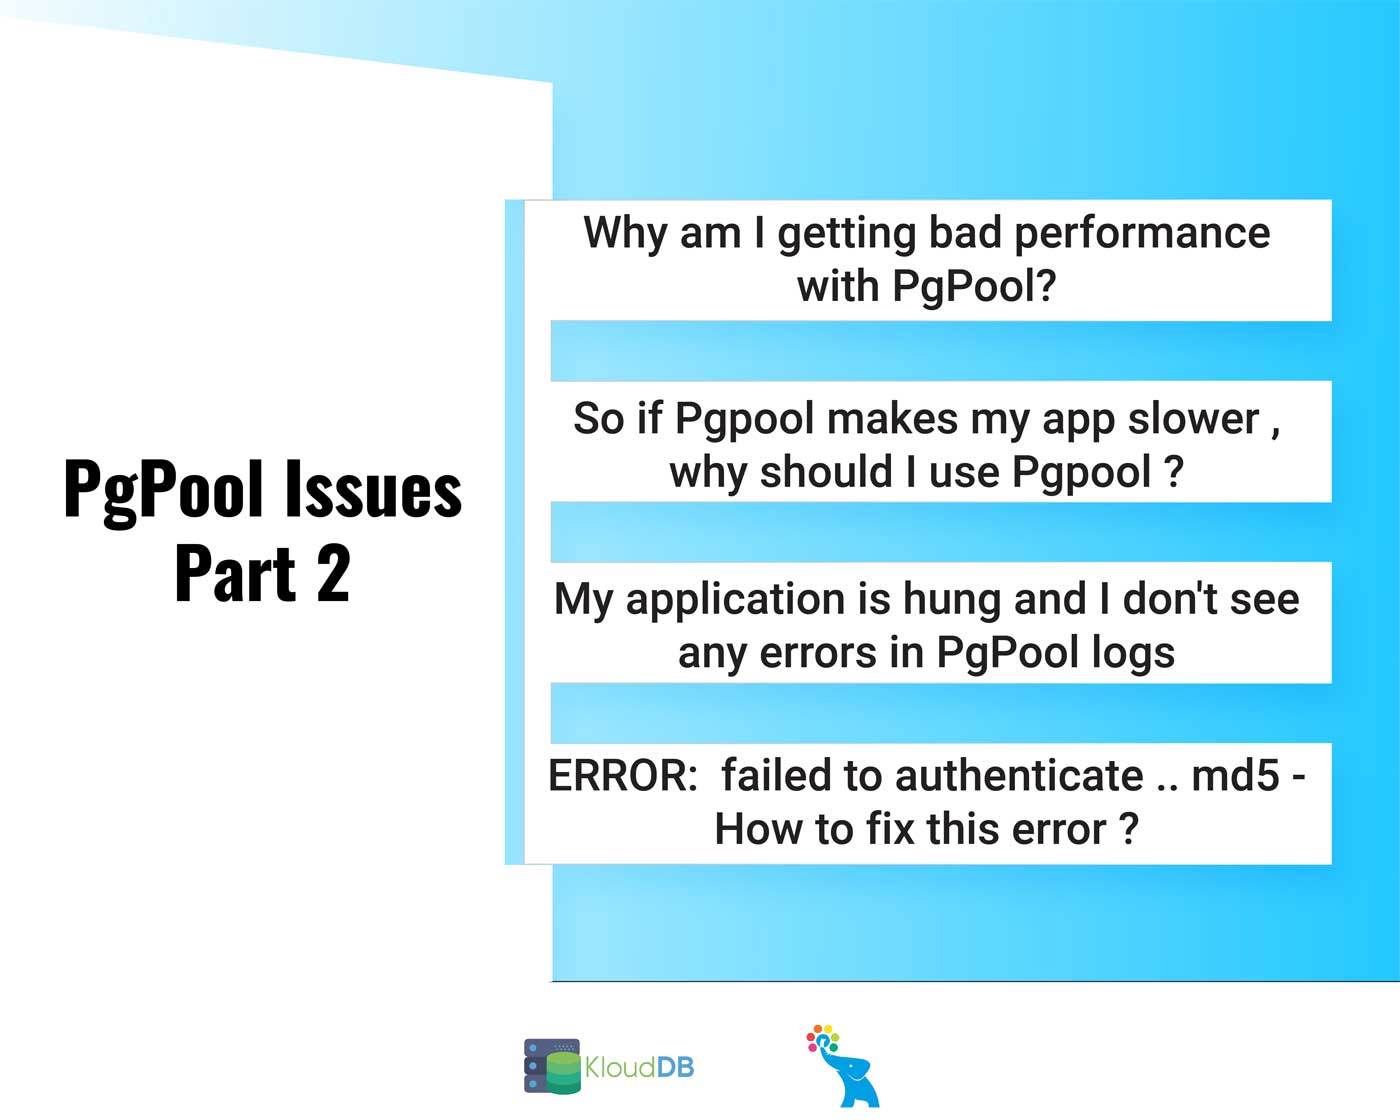 Pgpool Issues - Part 2